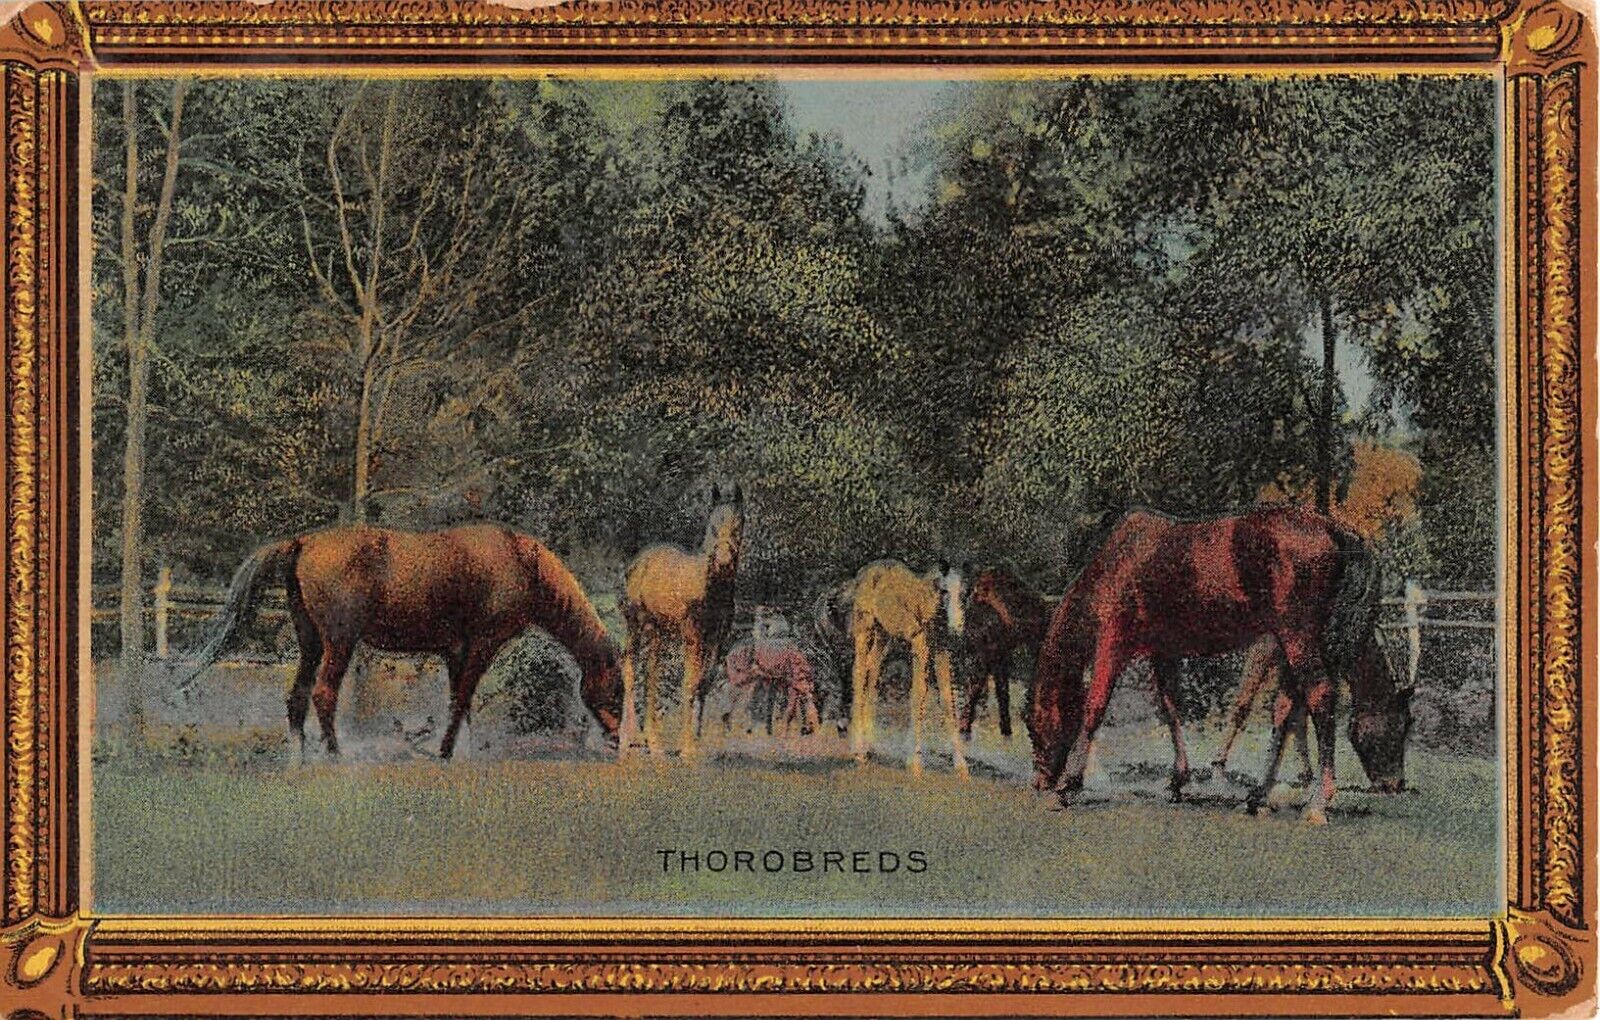 Thoroughbred Horses Grazing in a Field on Old Postcard Titled Thorobreds